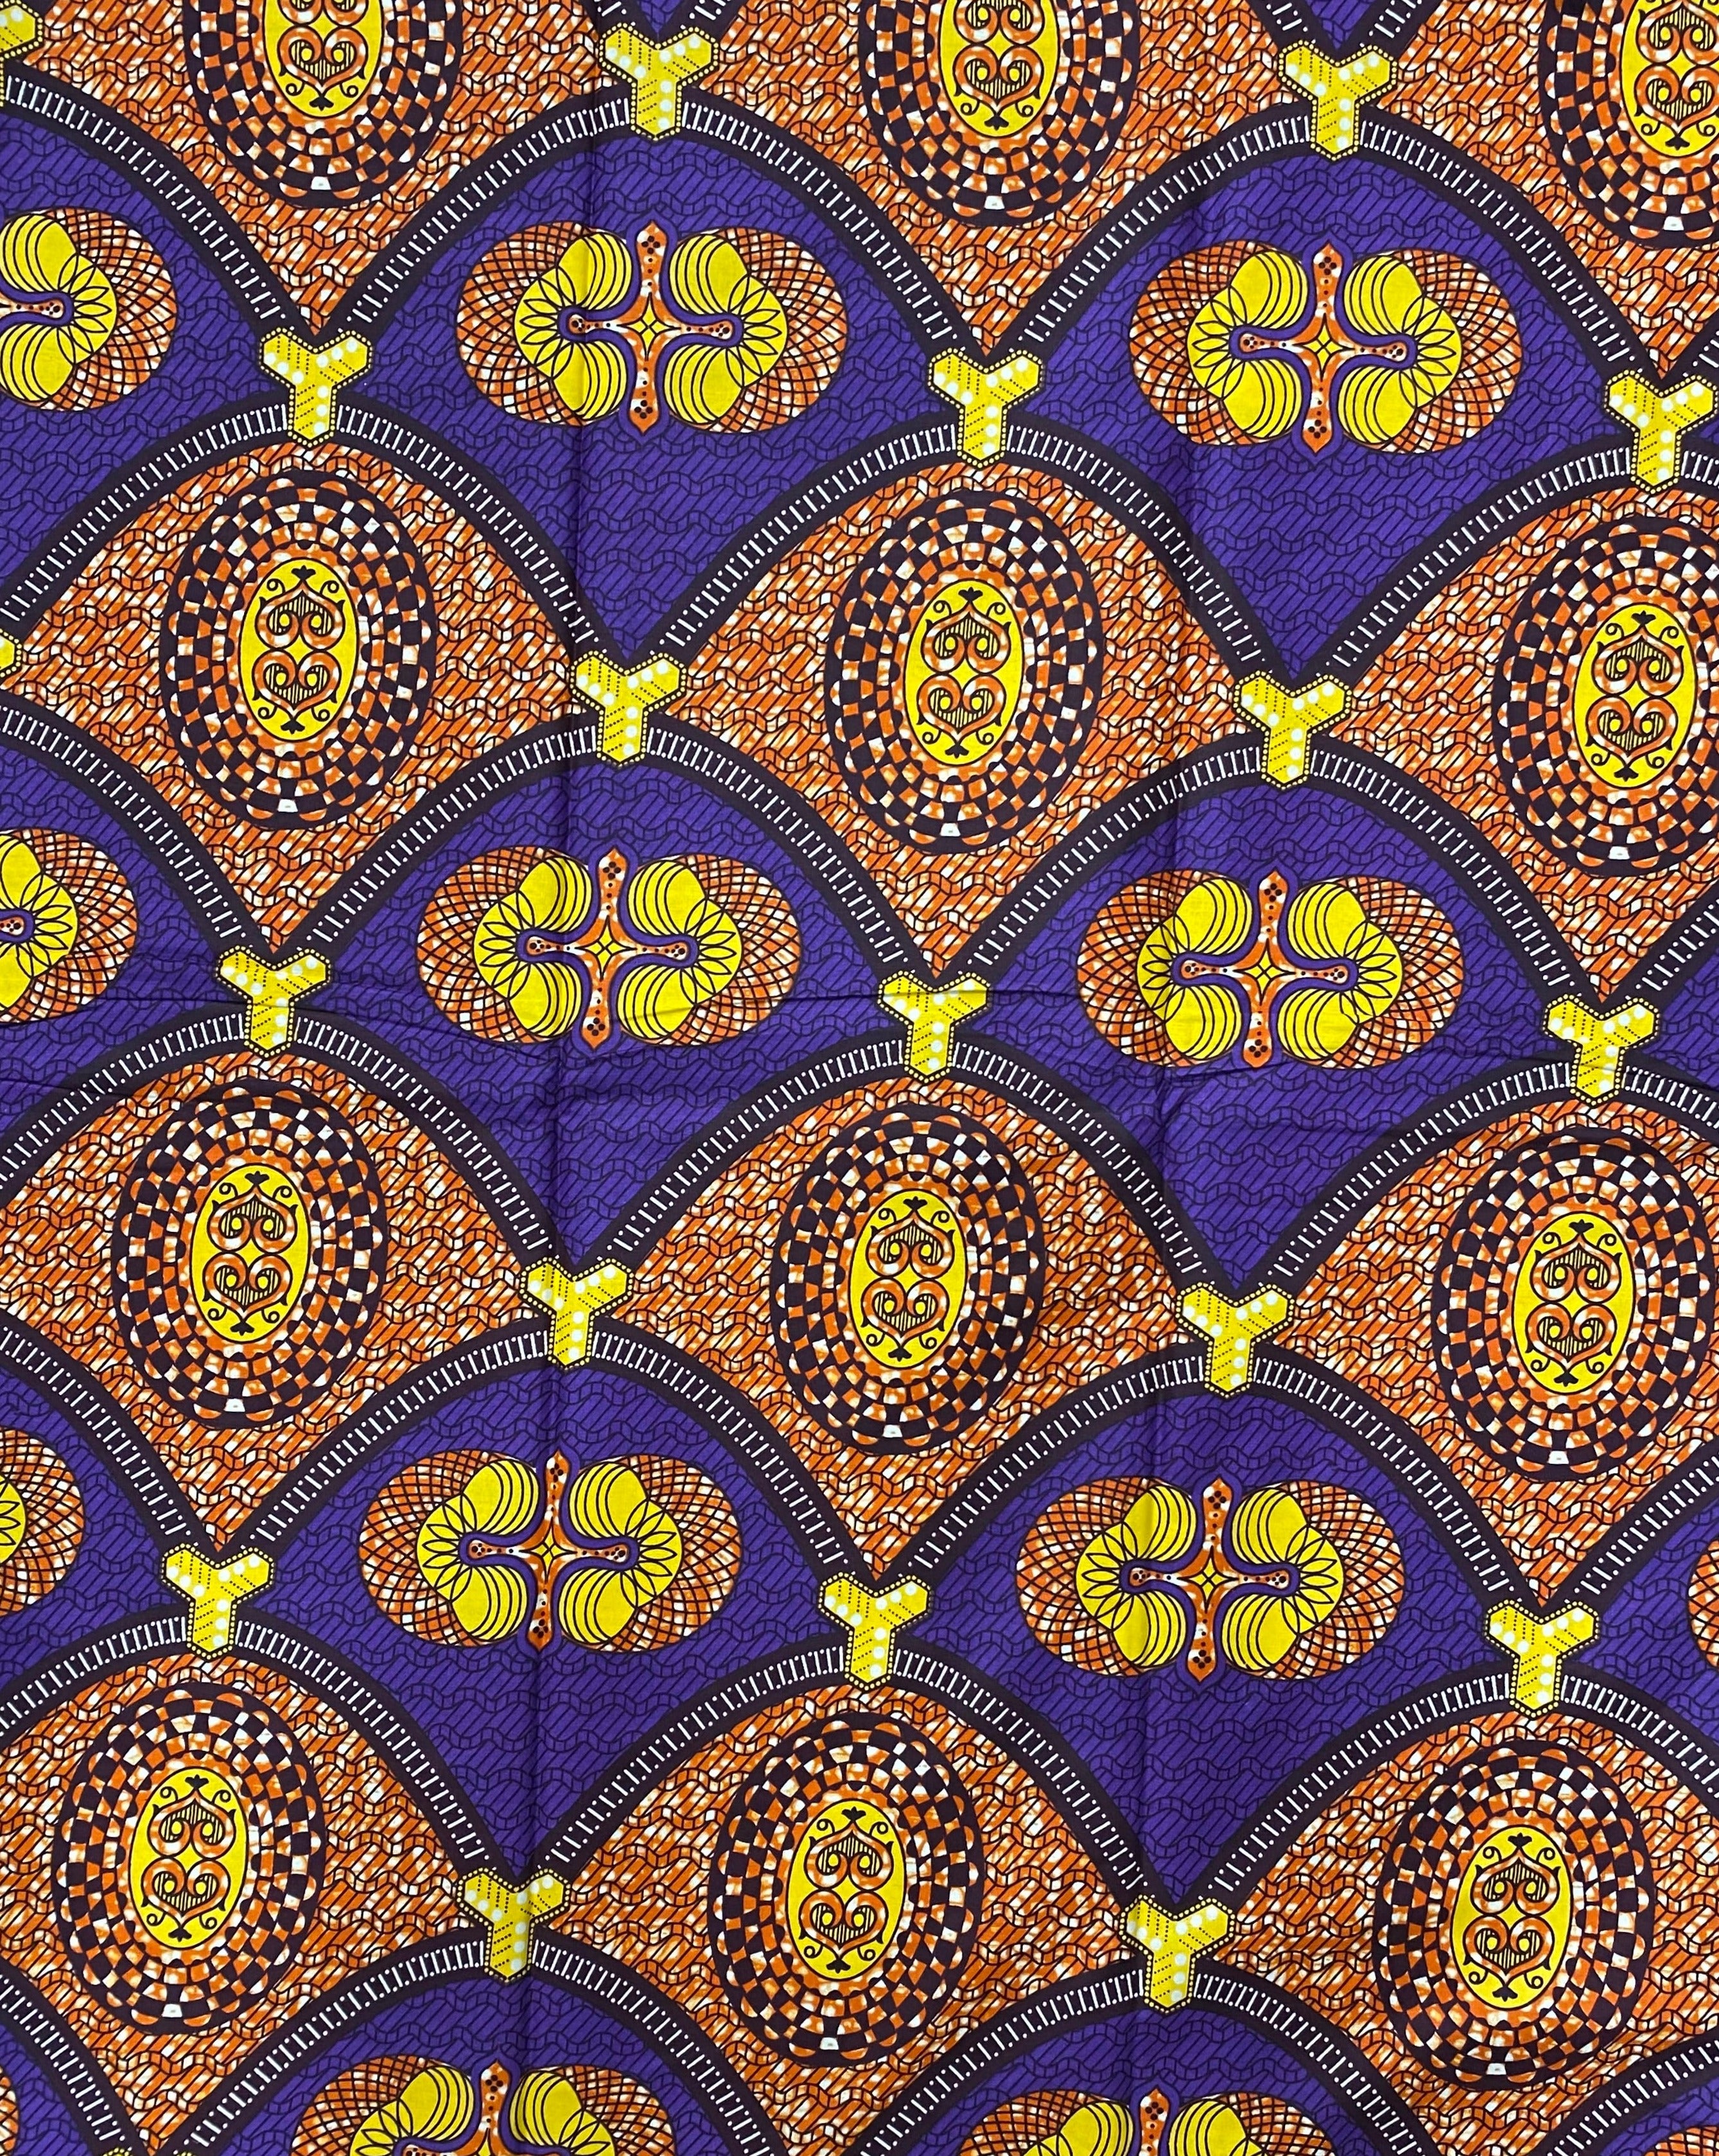 Queen's Arches African Print Fabric - 100% Cotton, 44" Wide, Festive and Unique